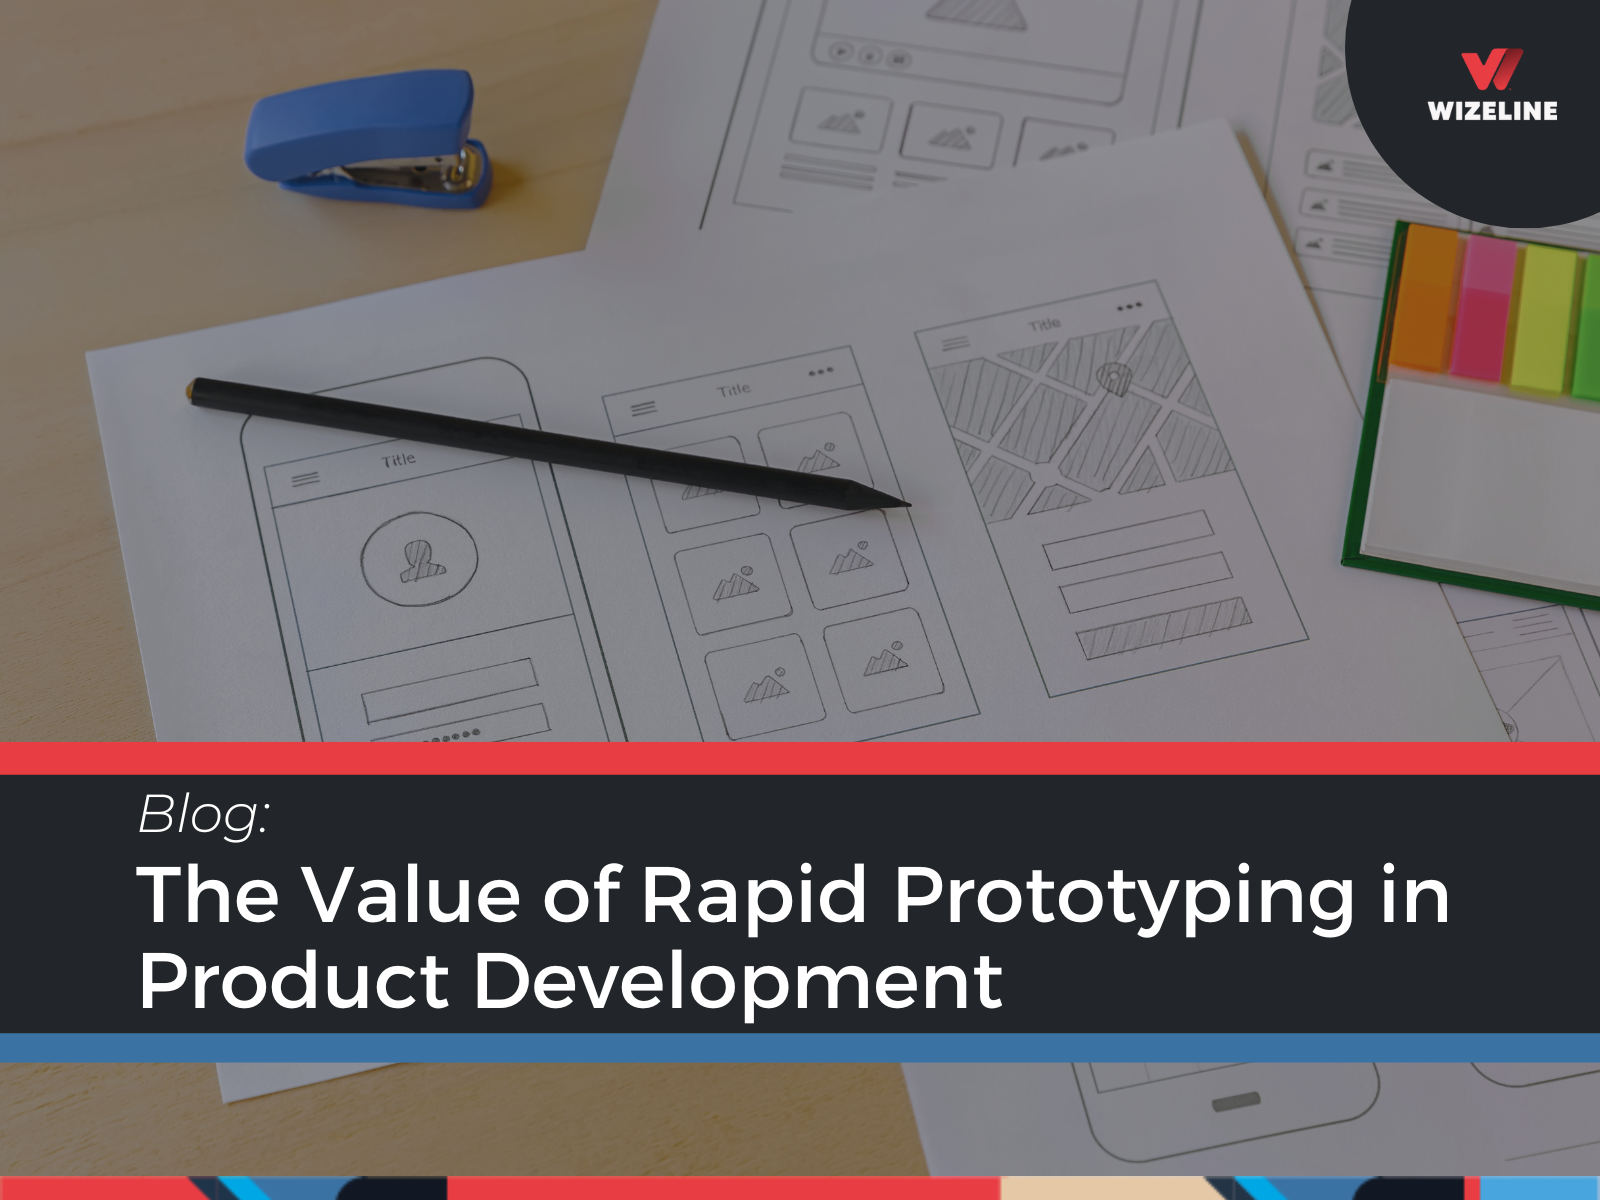 The Value of Rapid Prototyping in Product Development